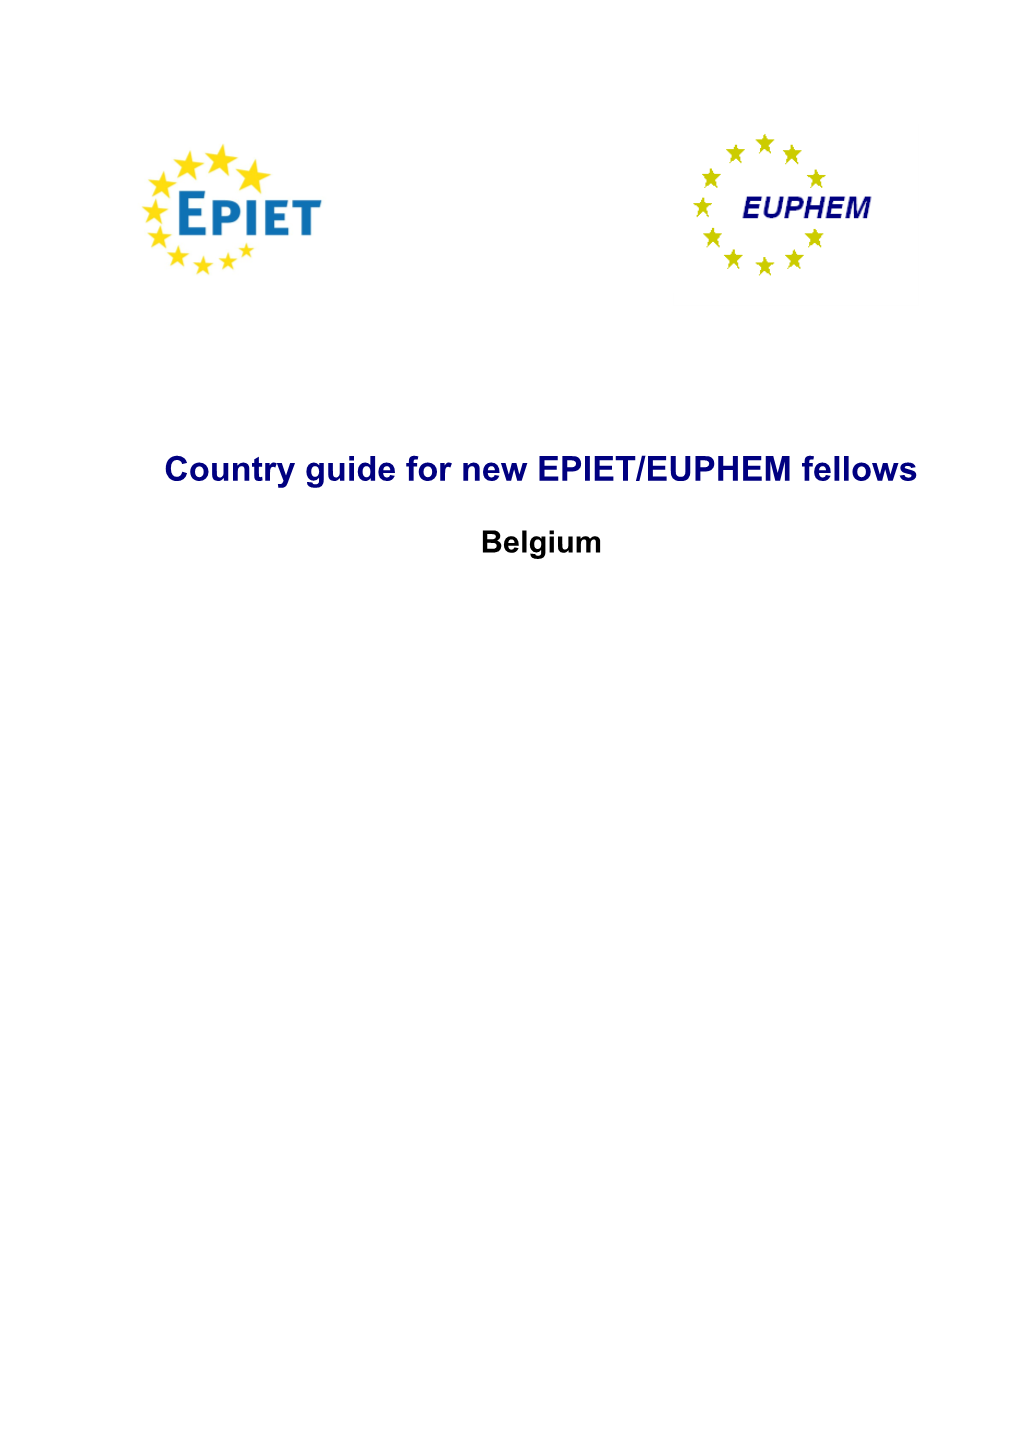 Guide for Epiet Fellows Hosted at Rivm, the Netherlands